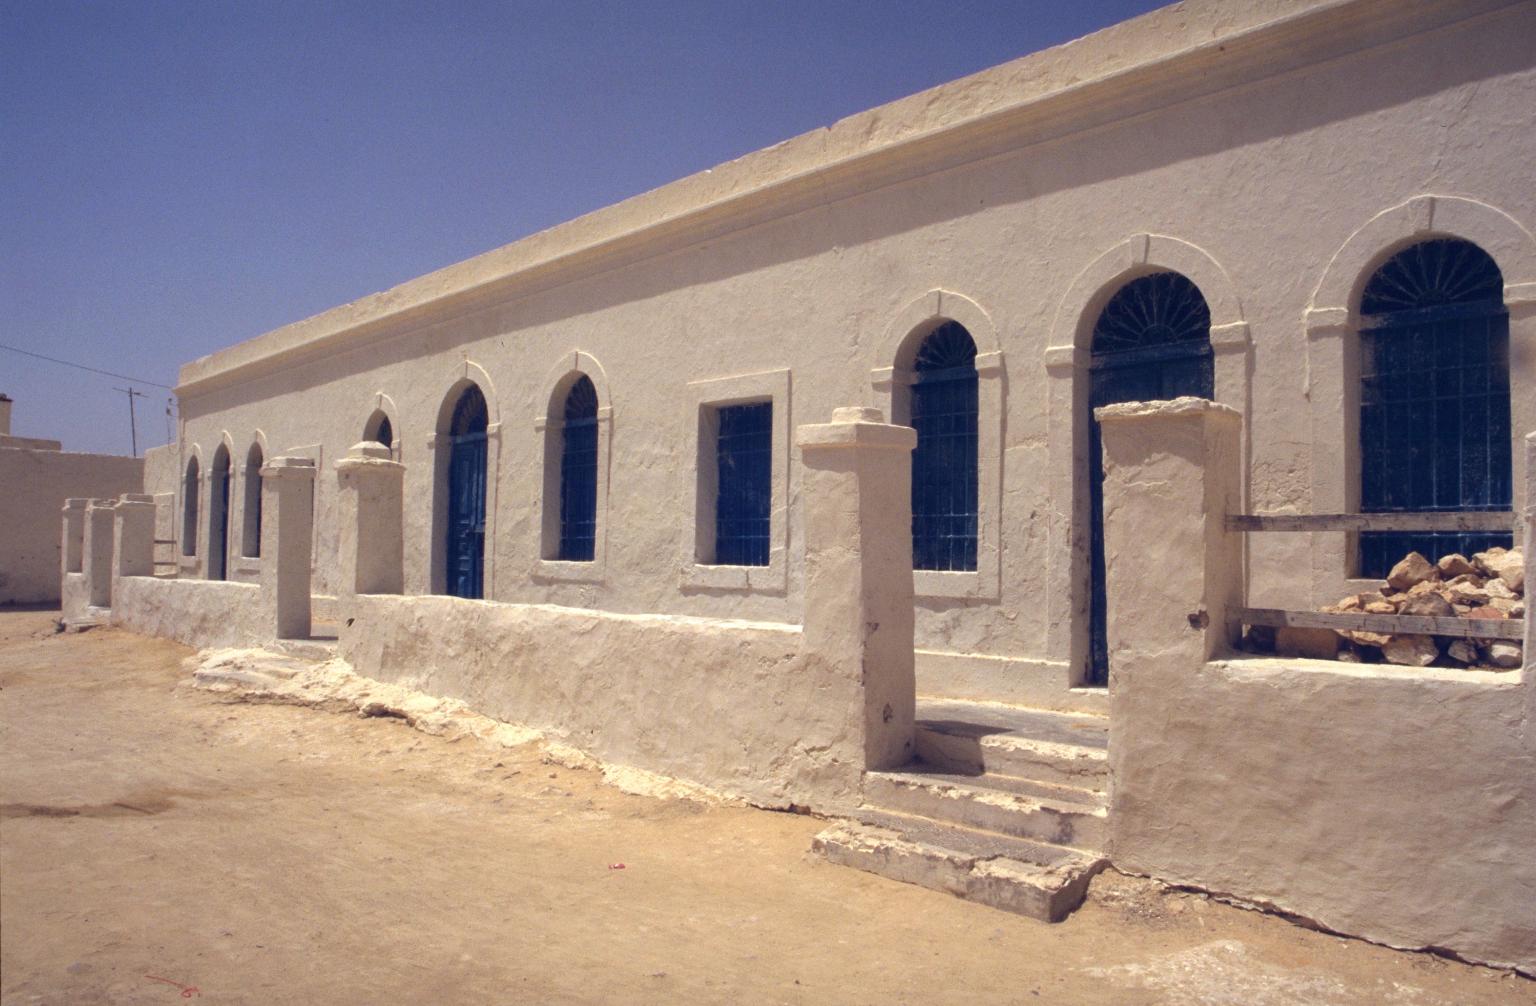 Exterior photograph of stone building with arched windows, wraparound patio with stone columns, and dirt ground.